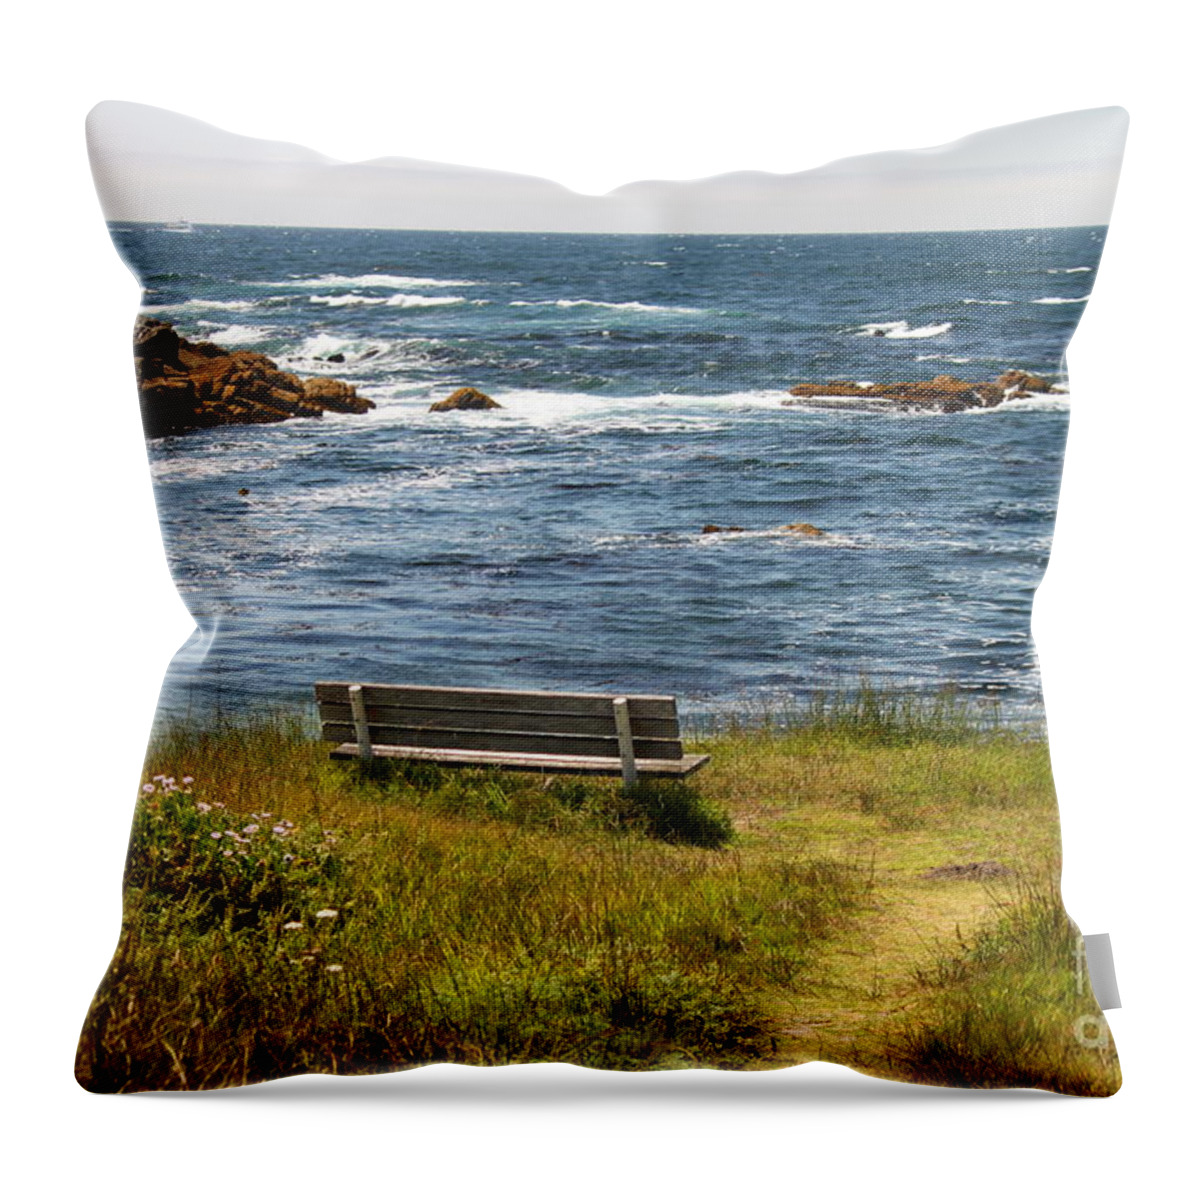 Seascape Throw Pillow featuring the photograph Serenity Bench by Bev Conover